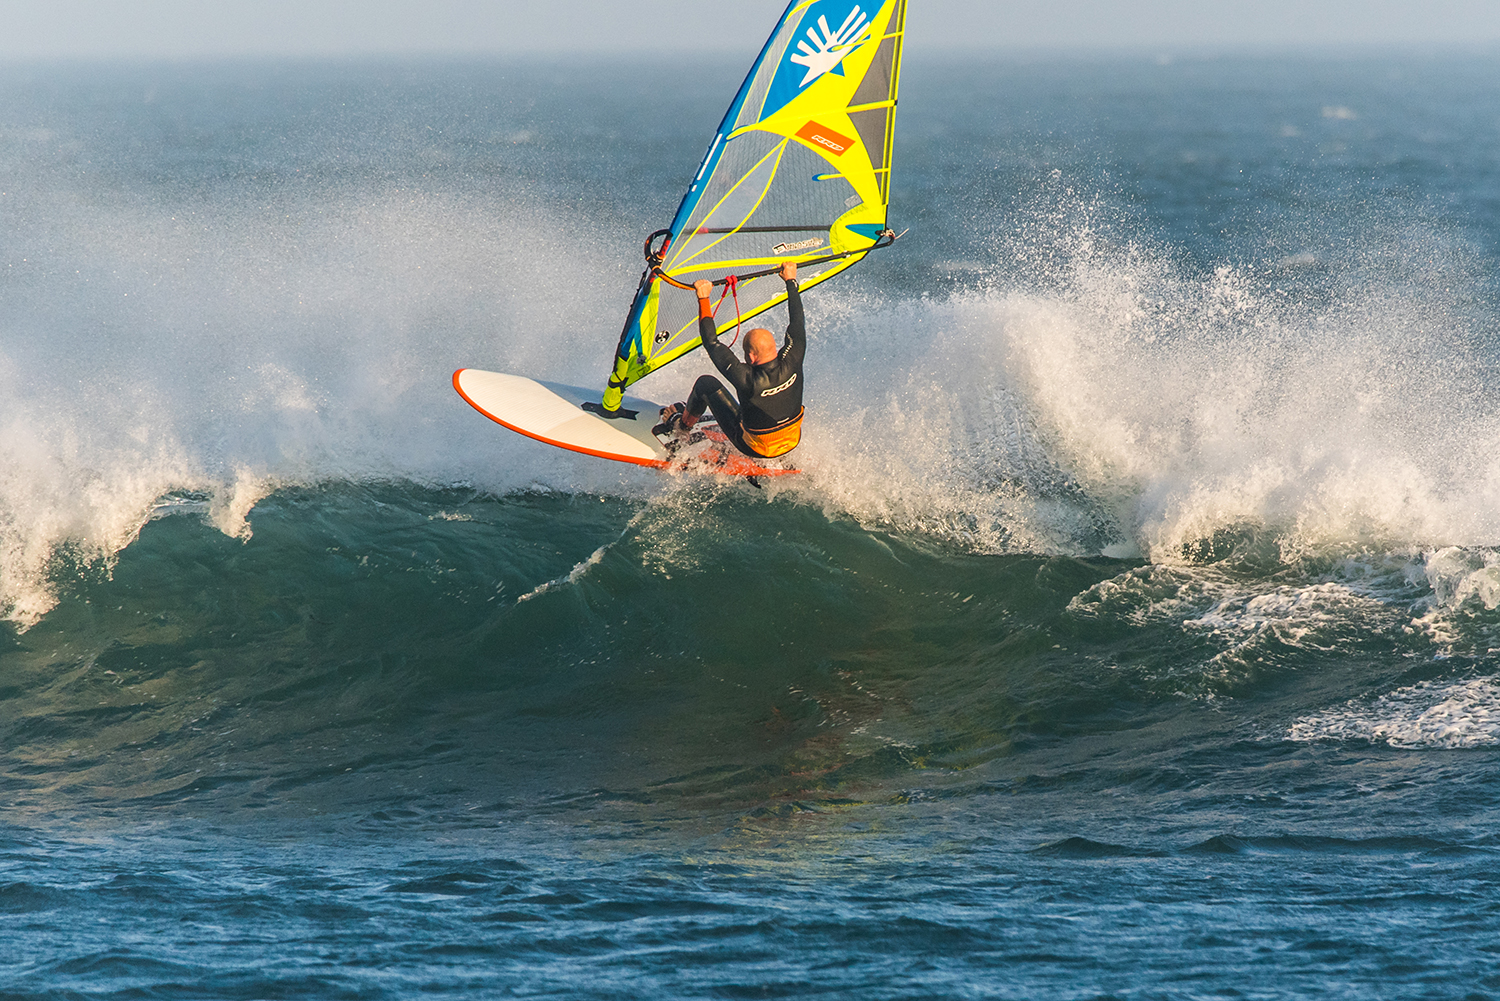 Good wave to air off, just hitting it in the wrong place and too early. Credit: Nick Jones.